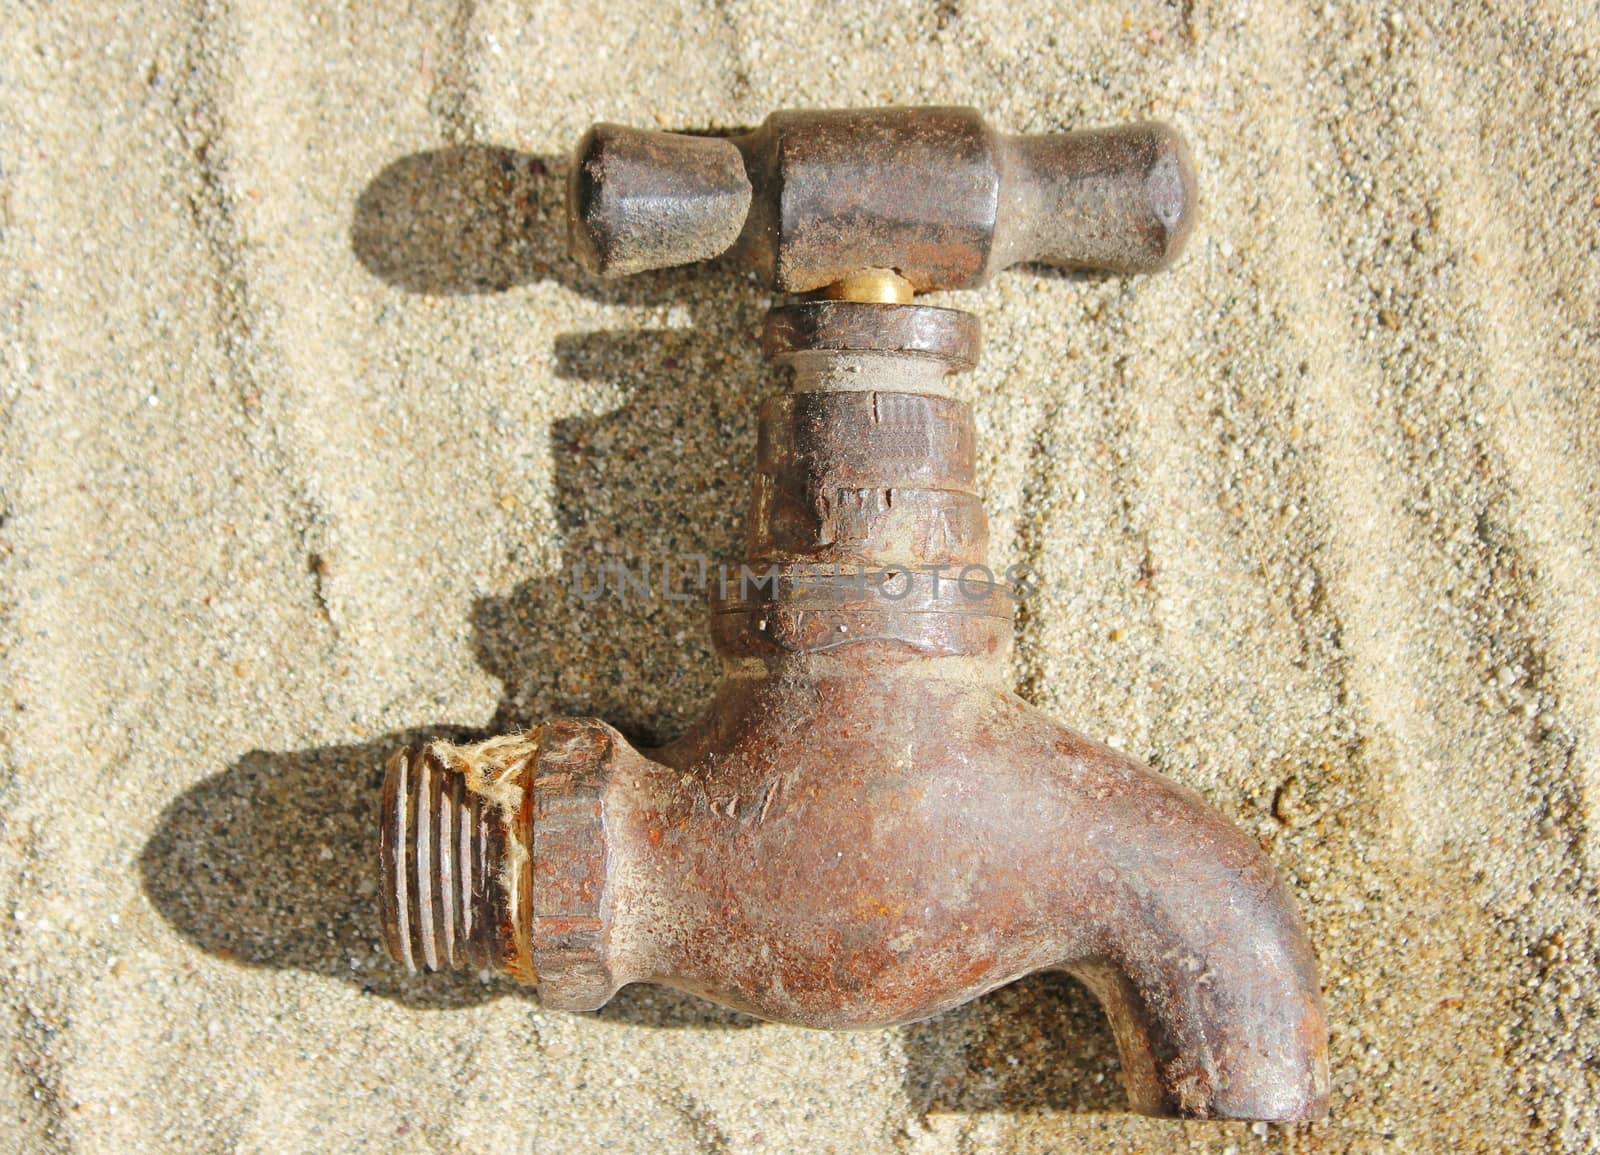 Rustic Water Faucet Tap Lying on Sand by RichieThakur